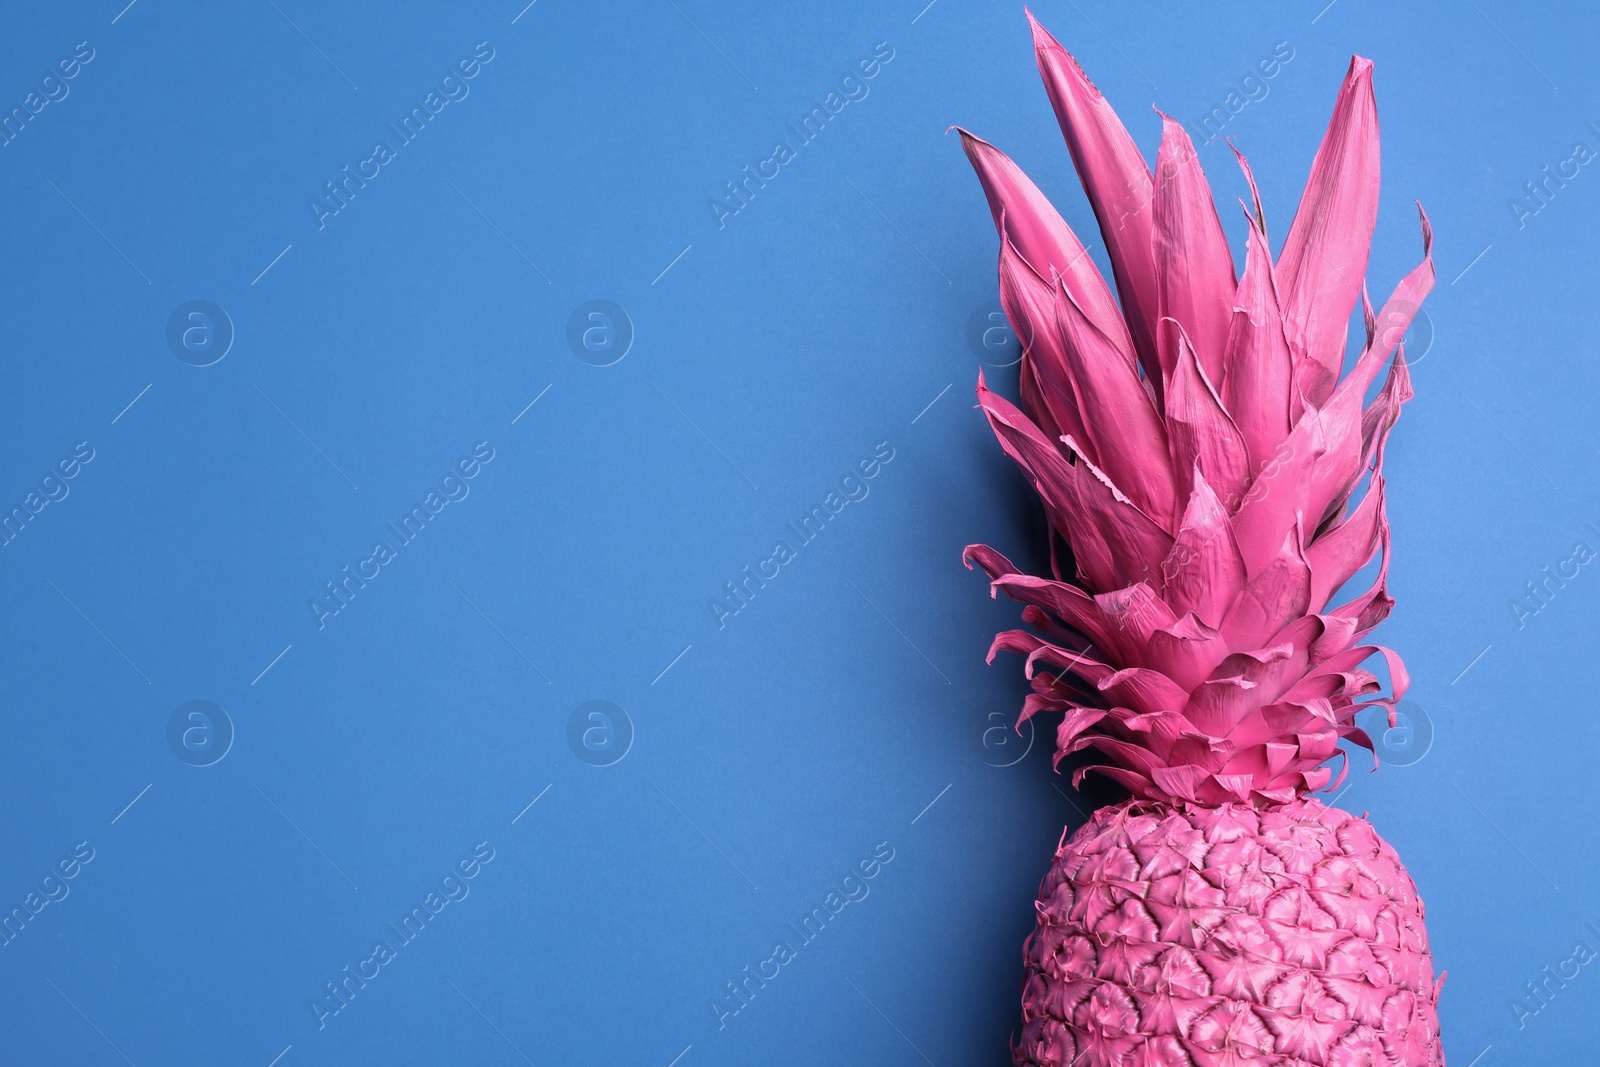 Photo of Pink pineapple on blue background, top view with space for text. Creative concept